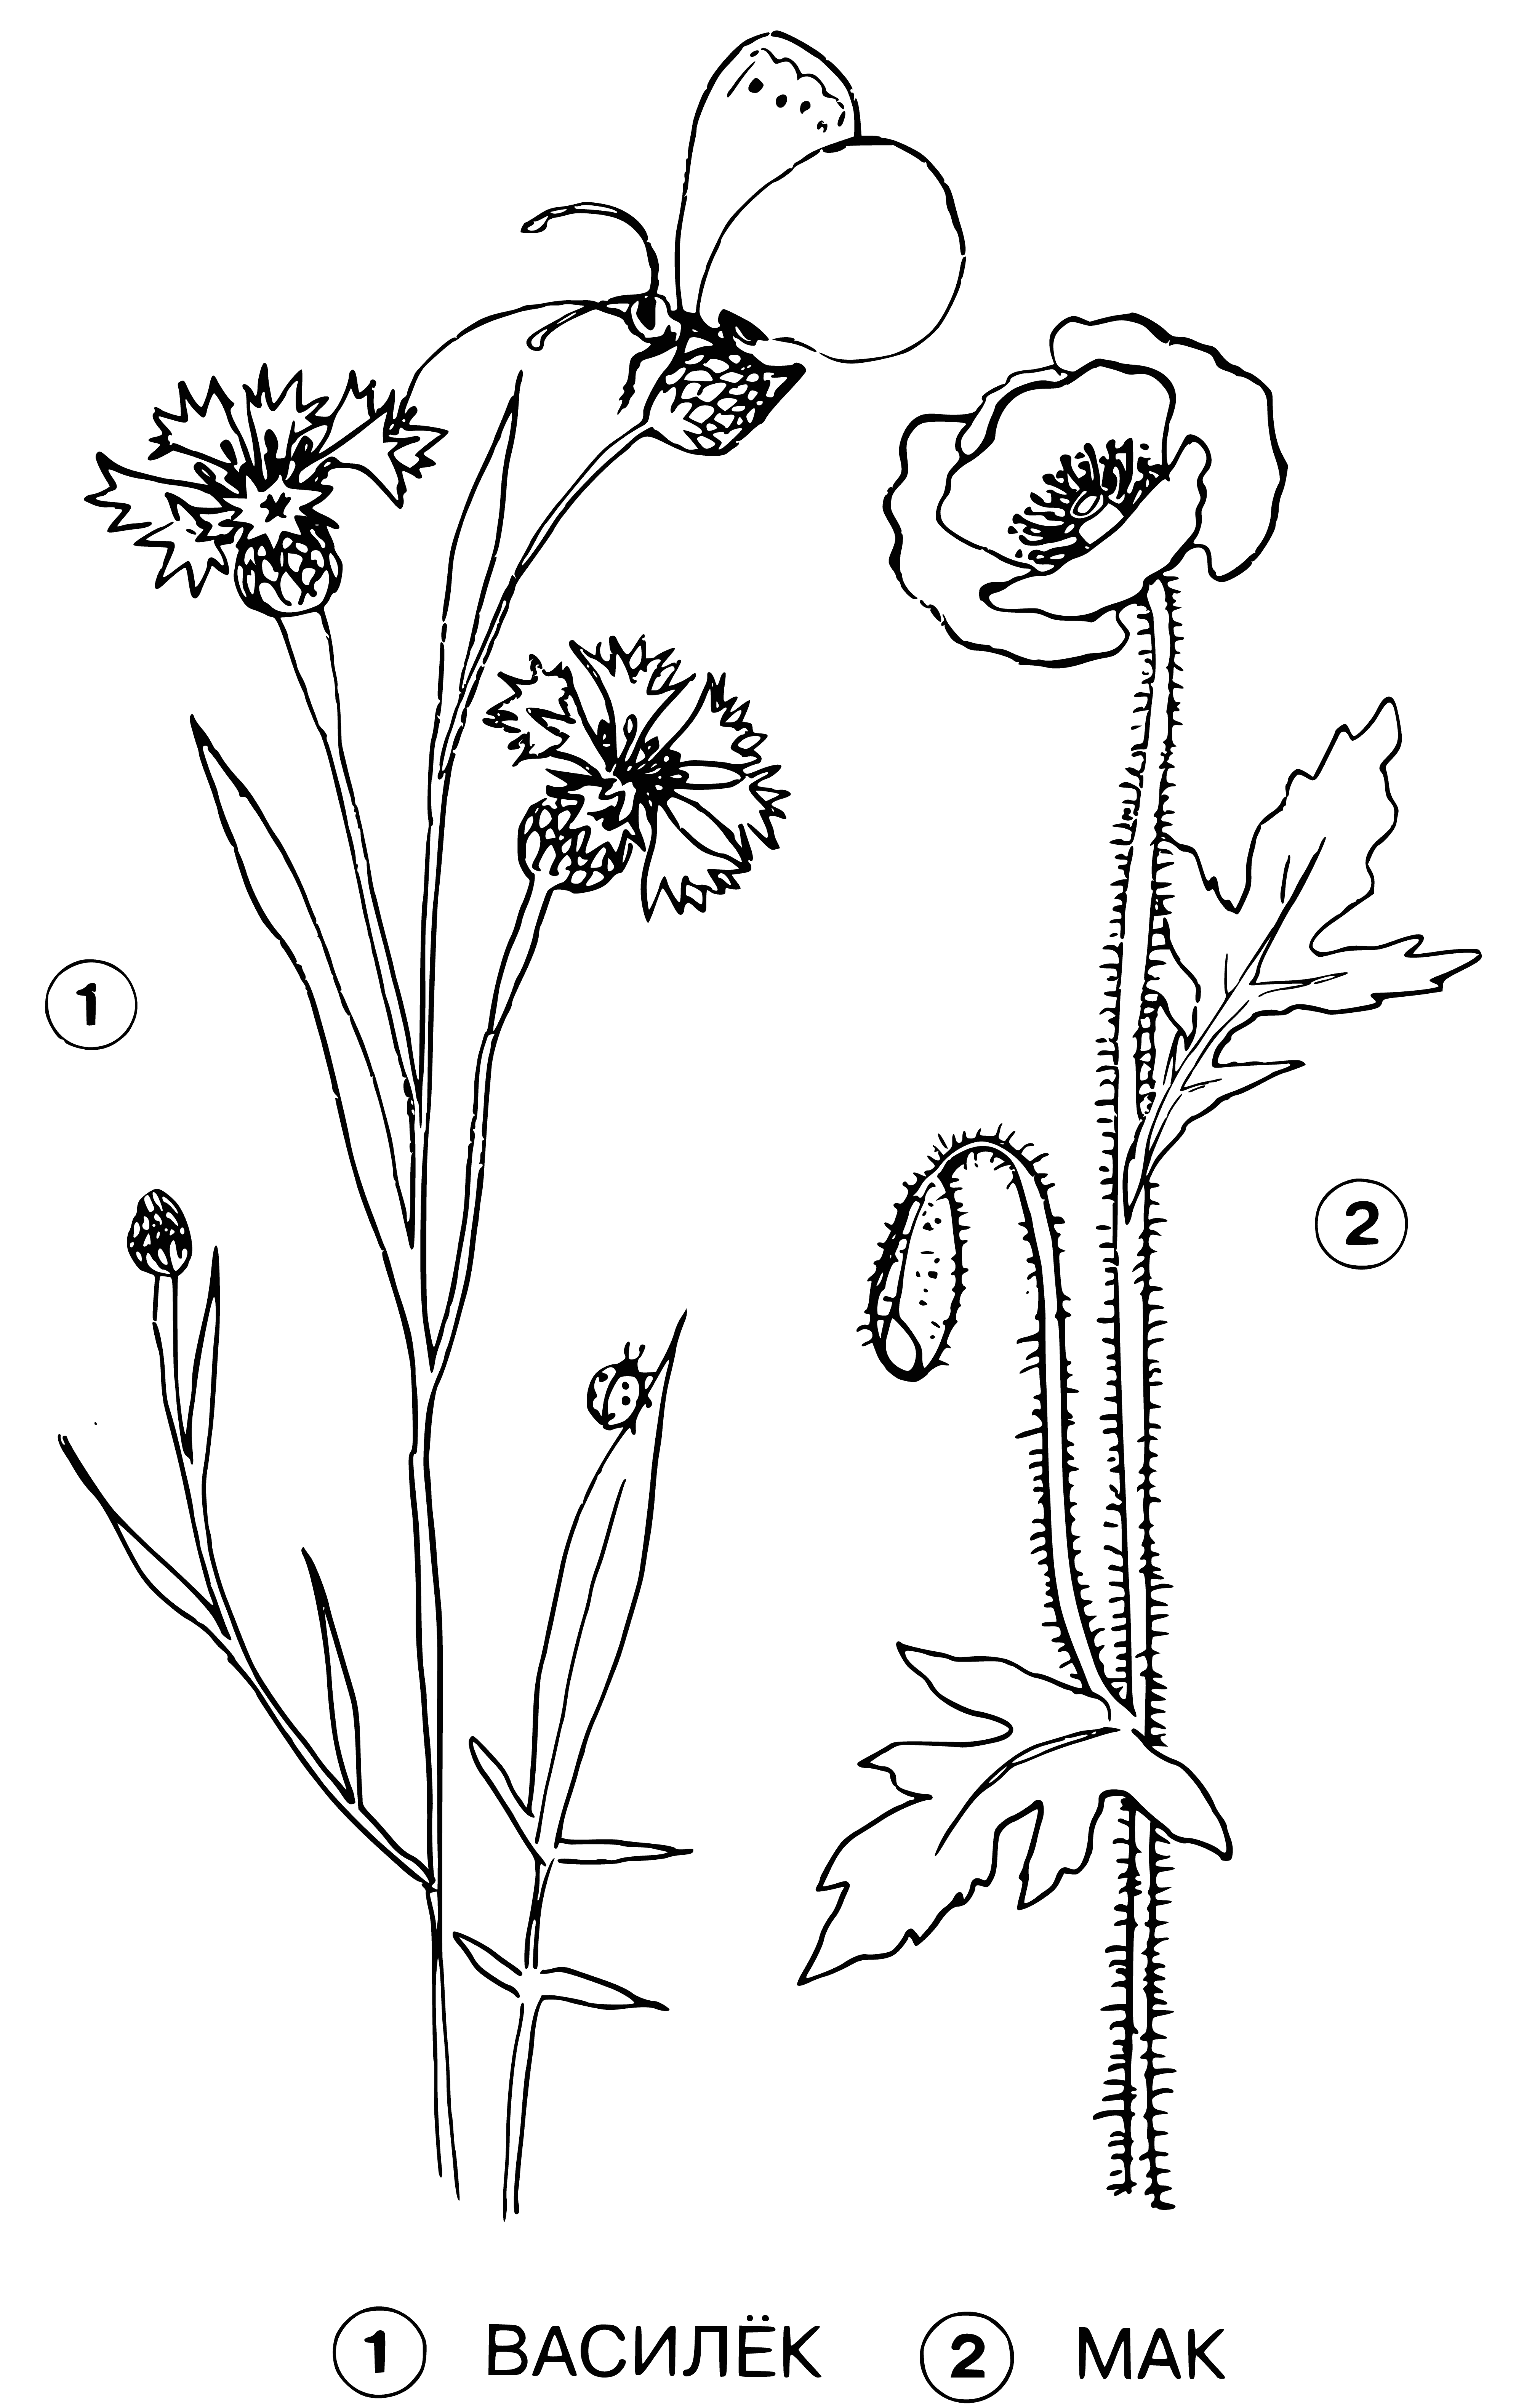 coloring page: Blue cornflower in center, red poppies surround it.